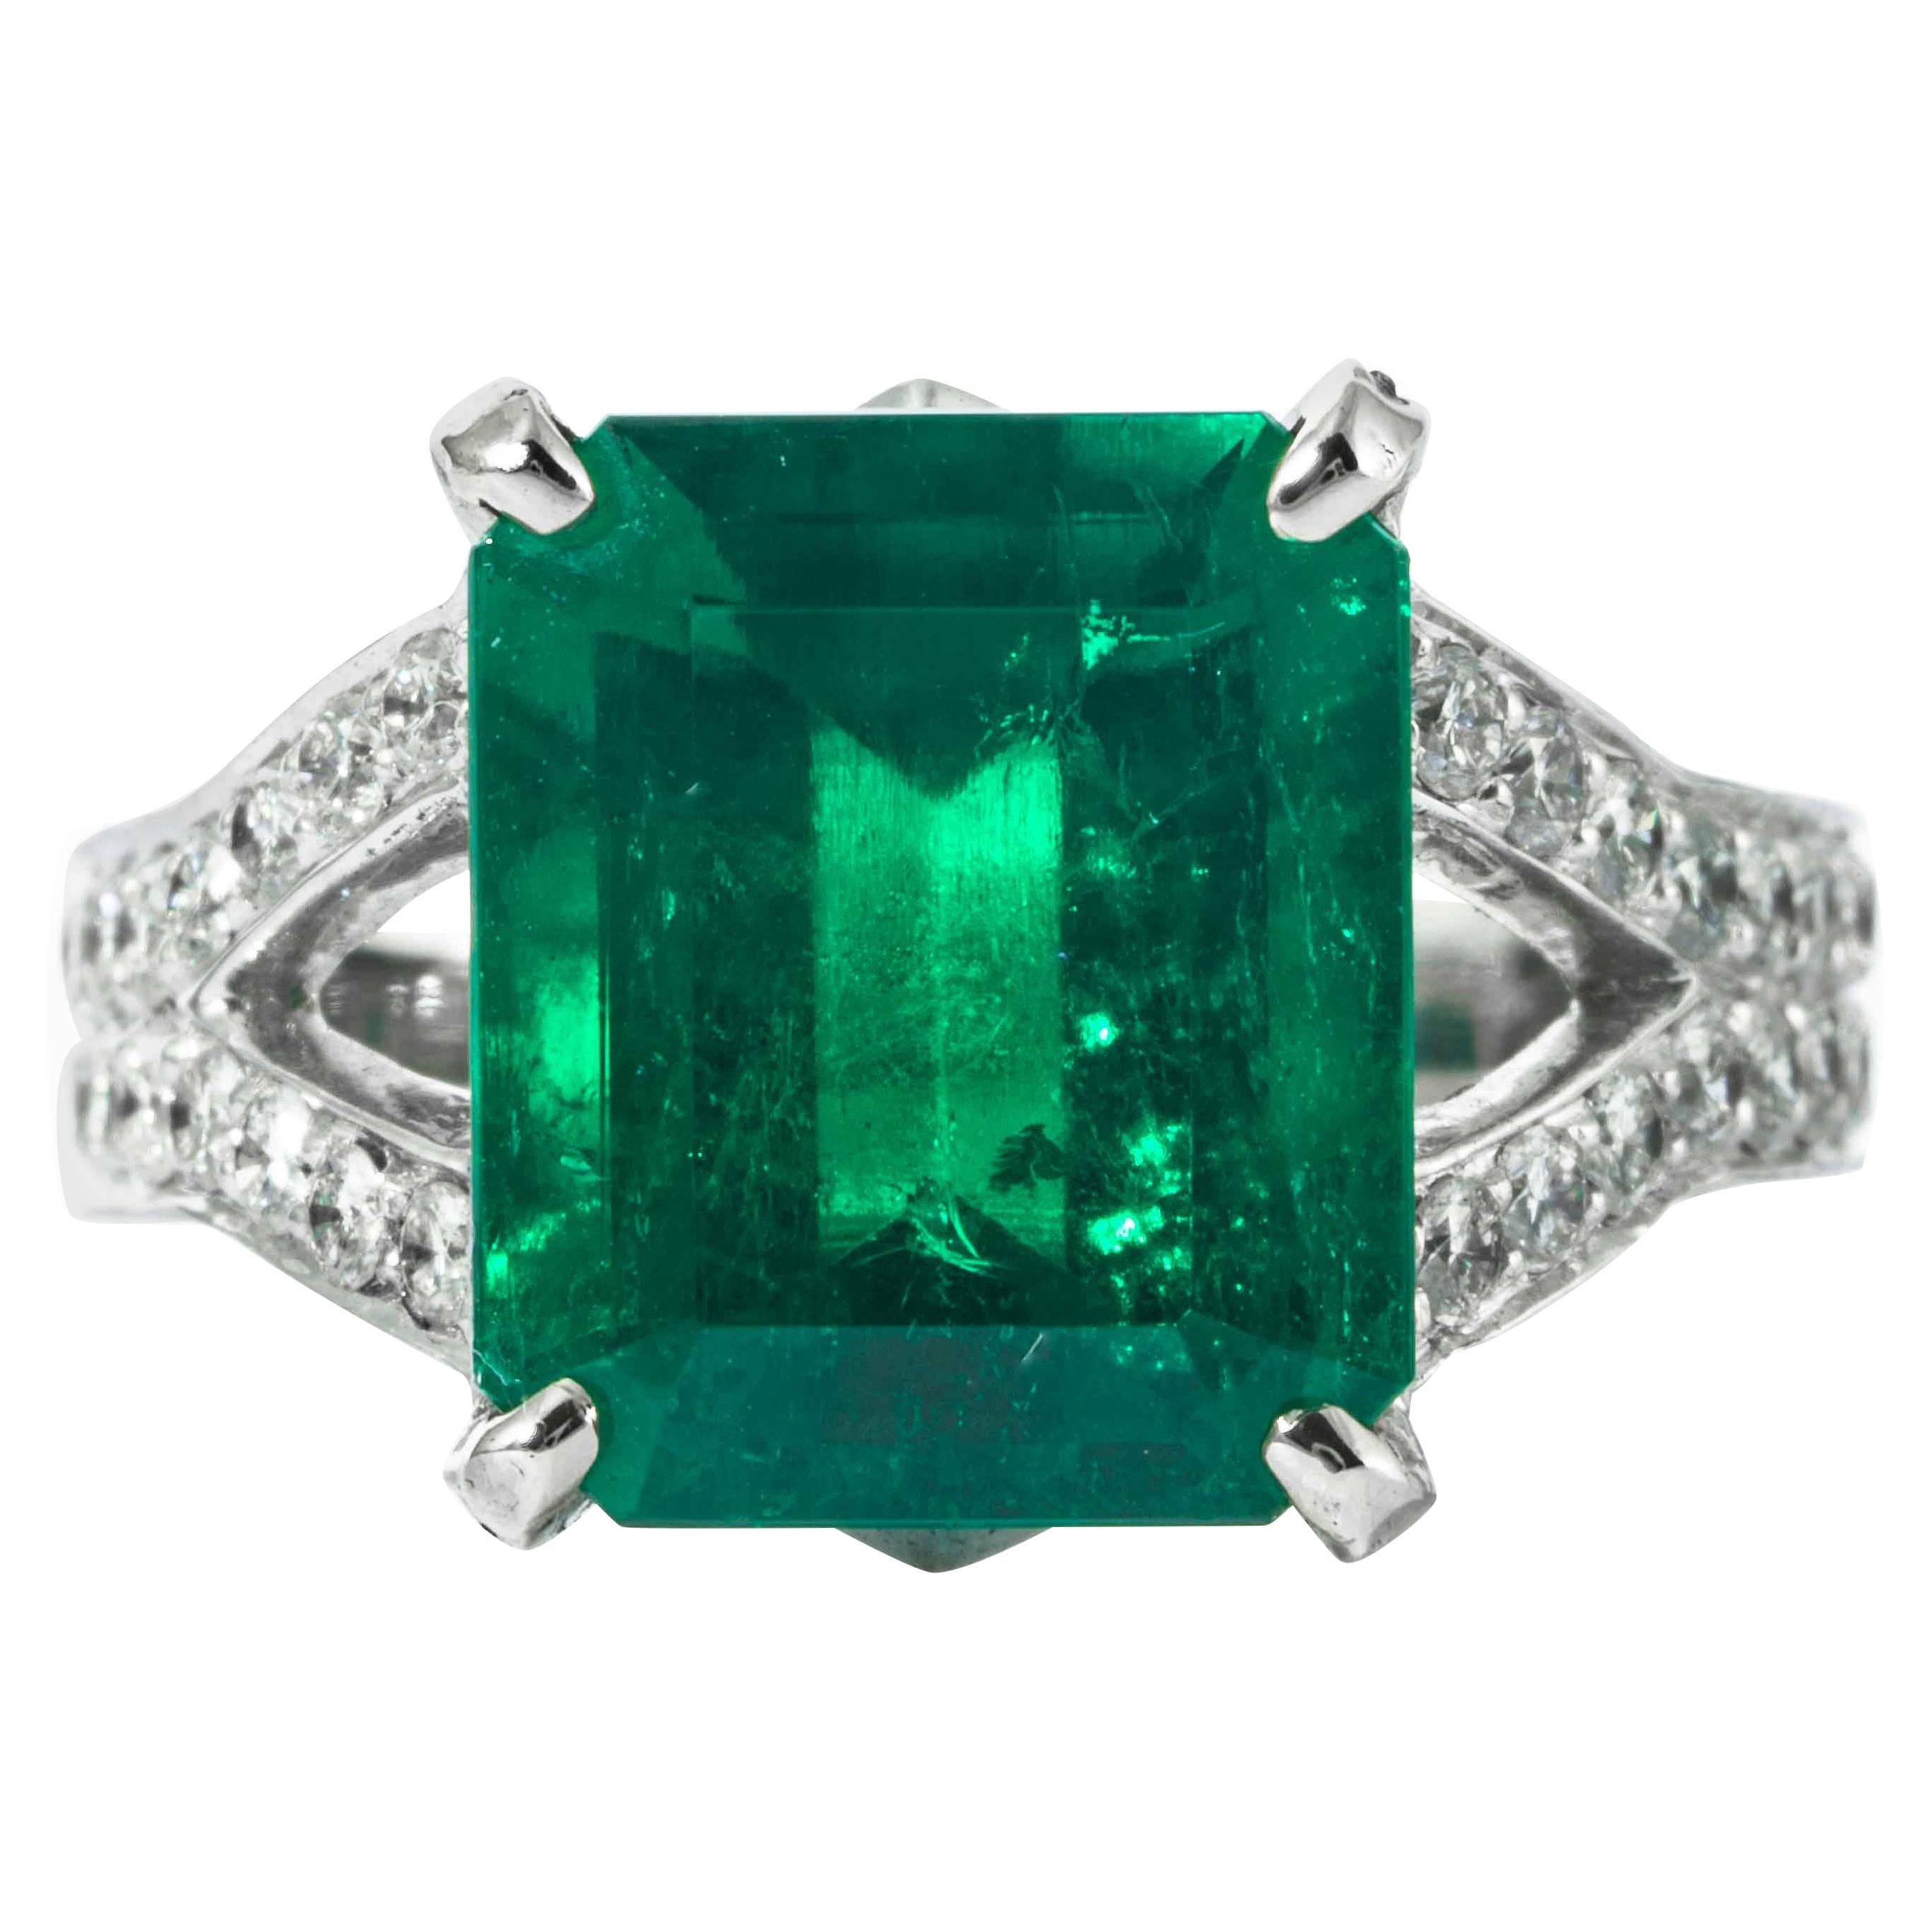 Shreve, Crump & Low 6.25 Carat Colombian Emerald and Diamond White Gold Ring